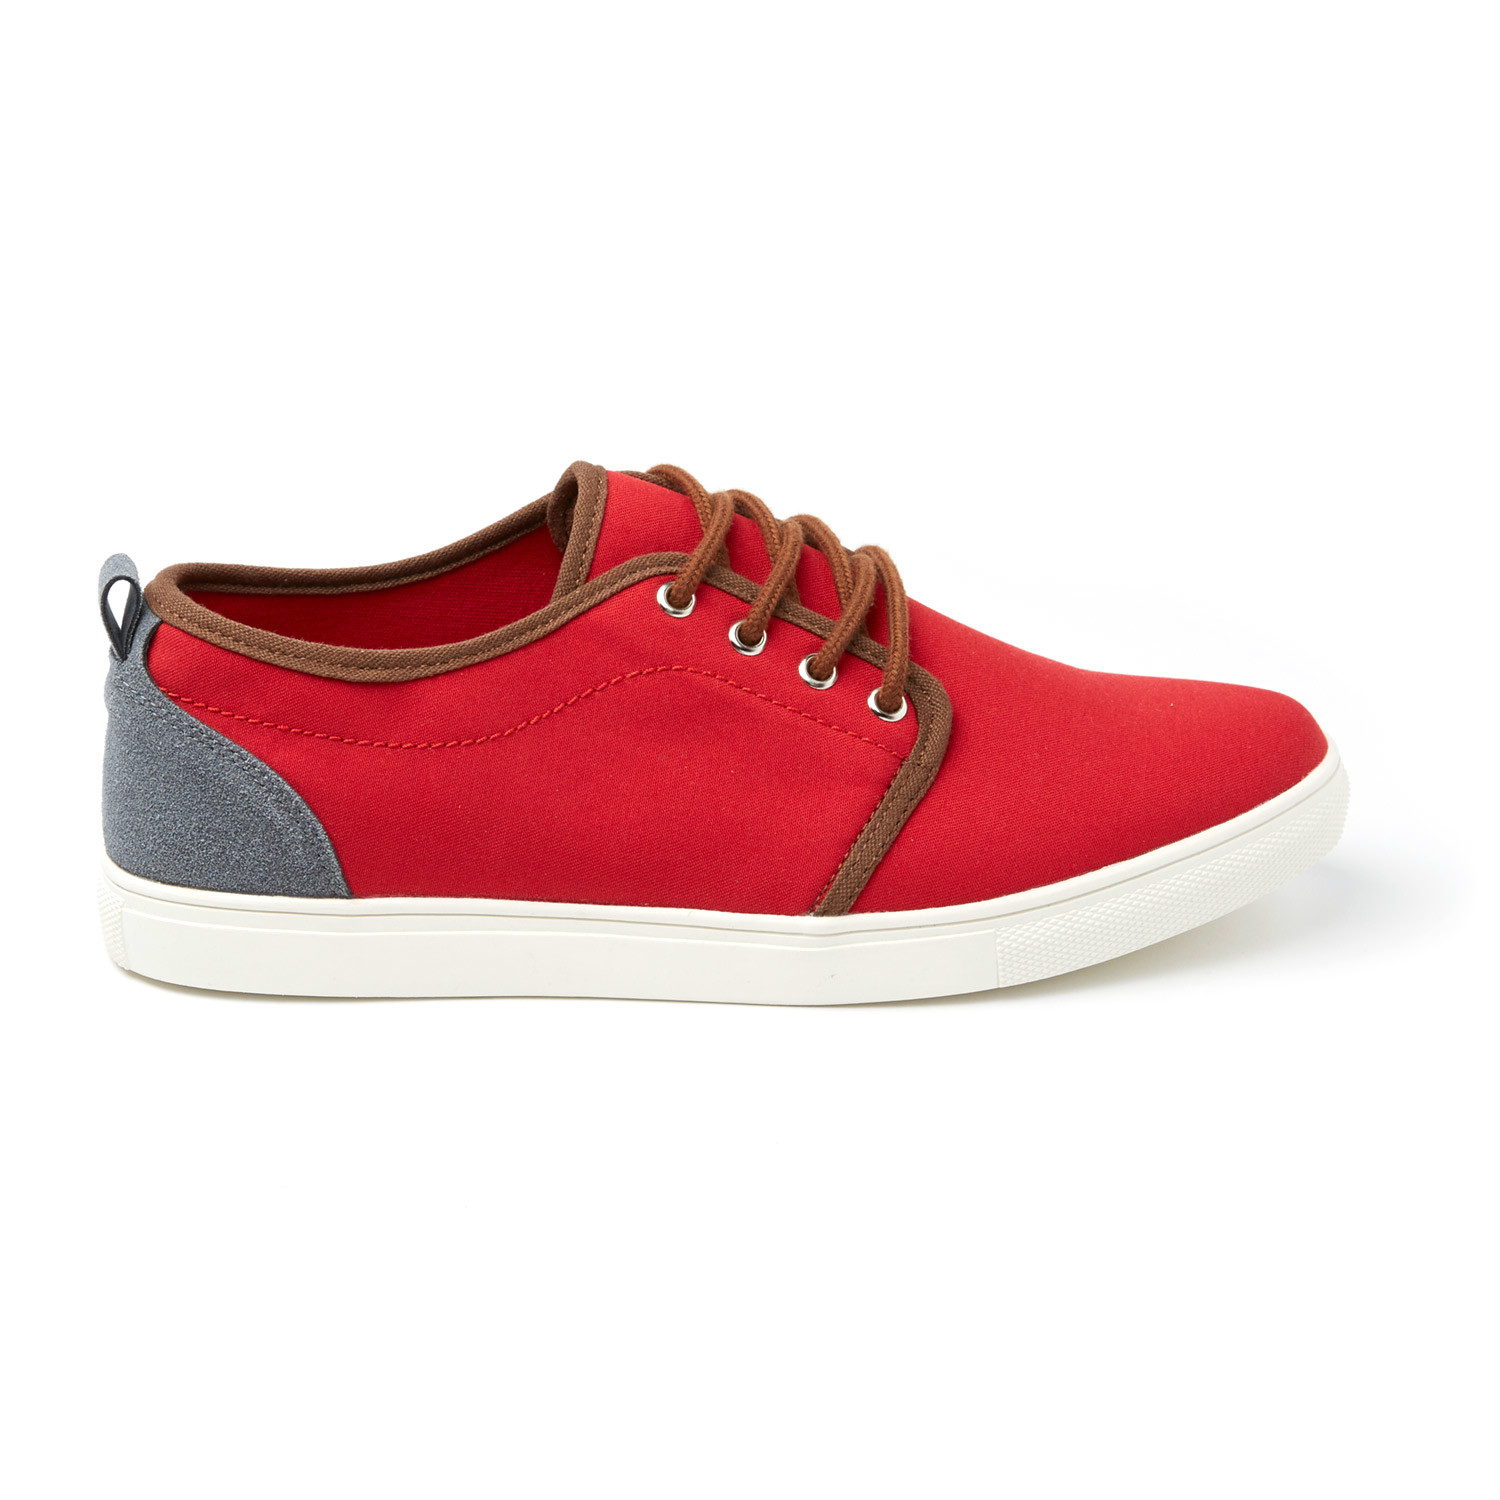 Solo Shoes // Howie Canvas Sneaker // Red (US: 7.5) - SOLO Shoes ...